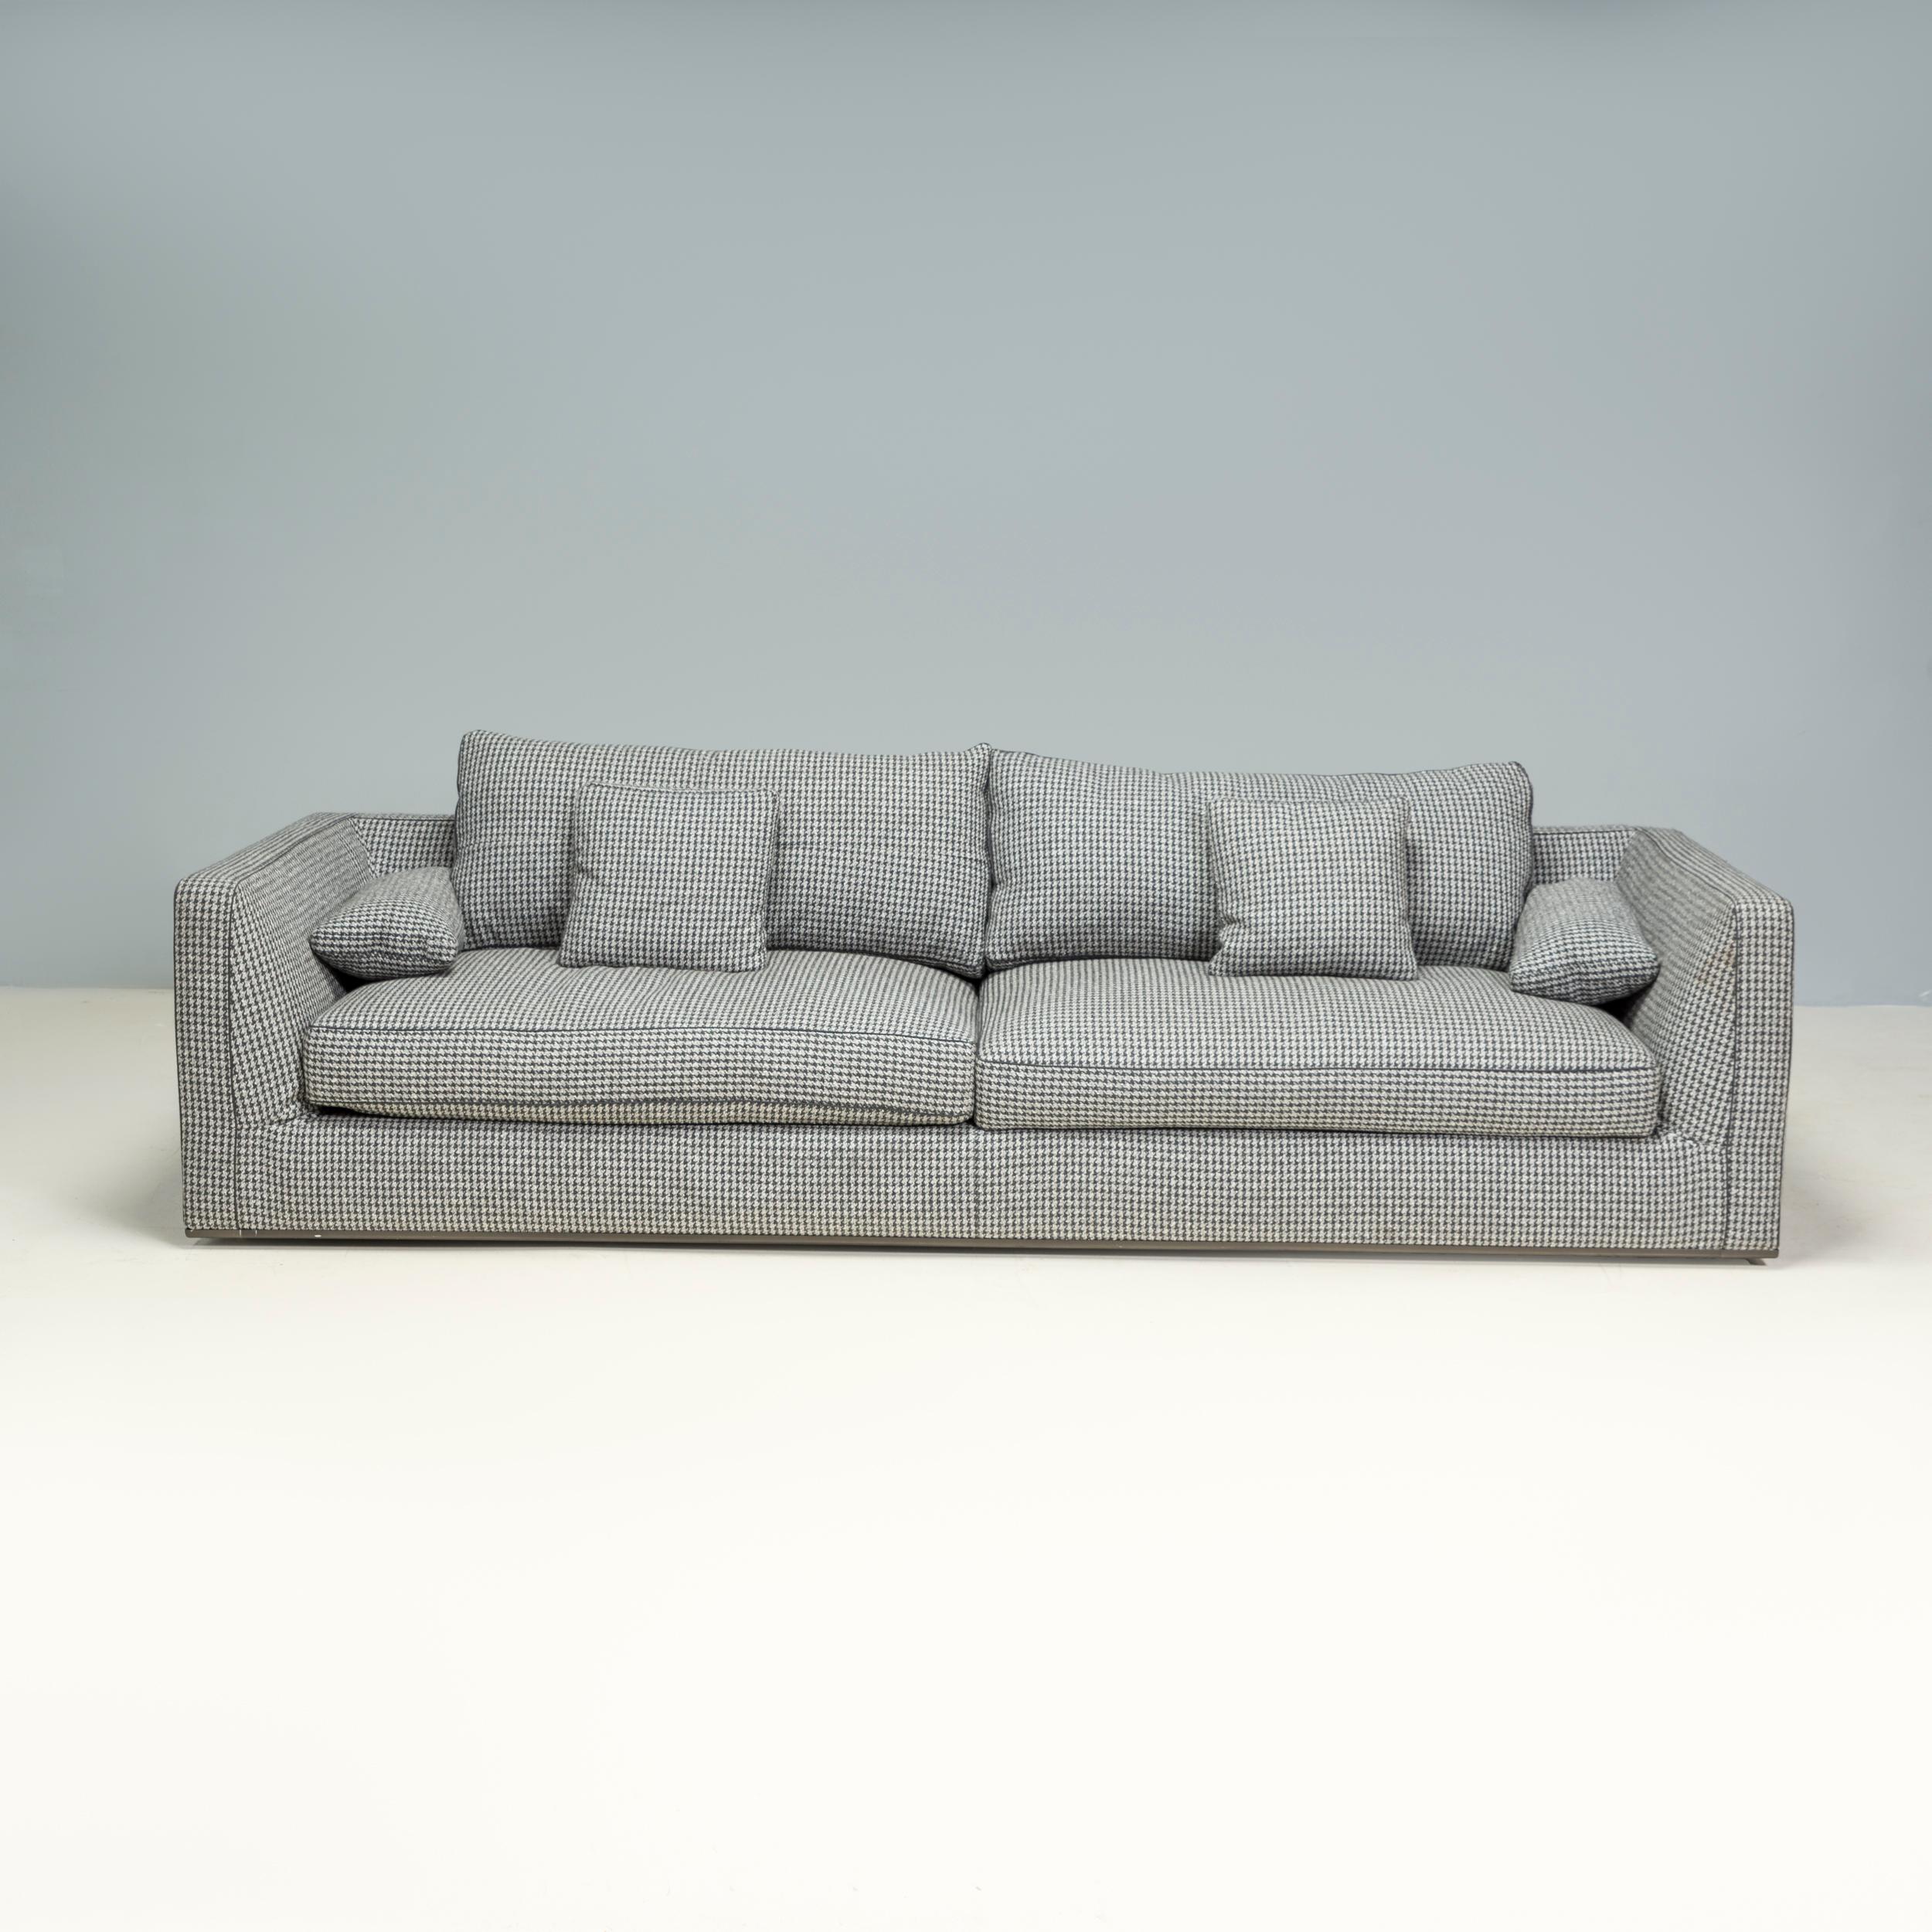 Originally designed by Antonio Citterio for B&B Italia in 2016, the Richard sofa is a fantastic example of contemporary Italian design. 

The three seat sofa is constructed from a tubular steel frame, with a slimline tuxedo style silhouette. 

With